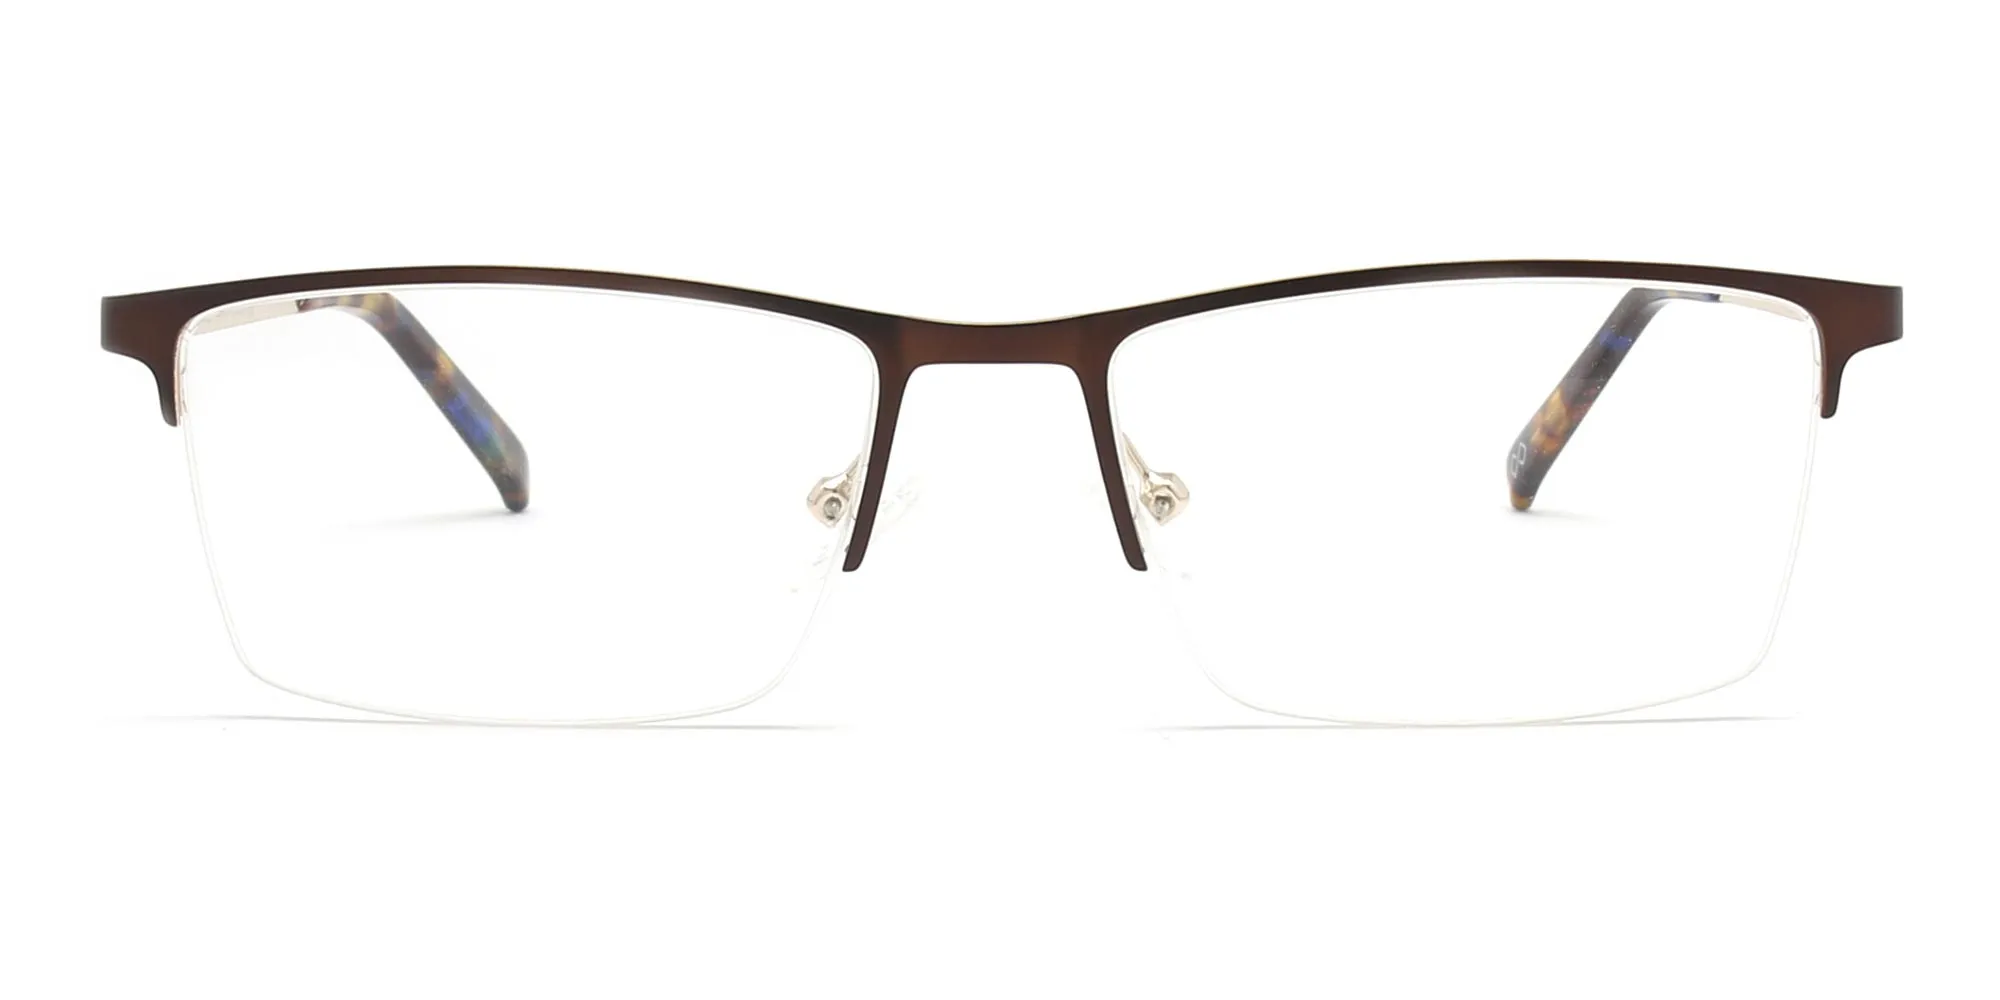 Glasses For Computer Use-2